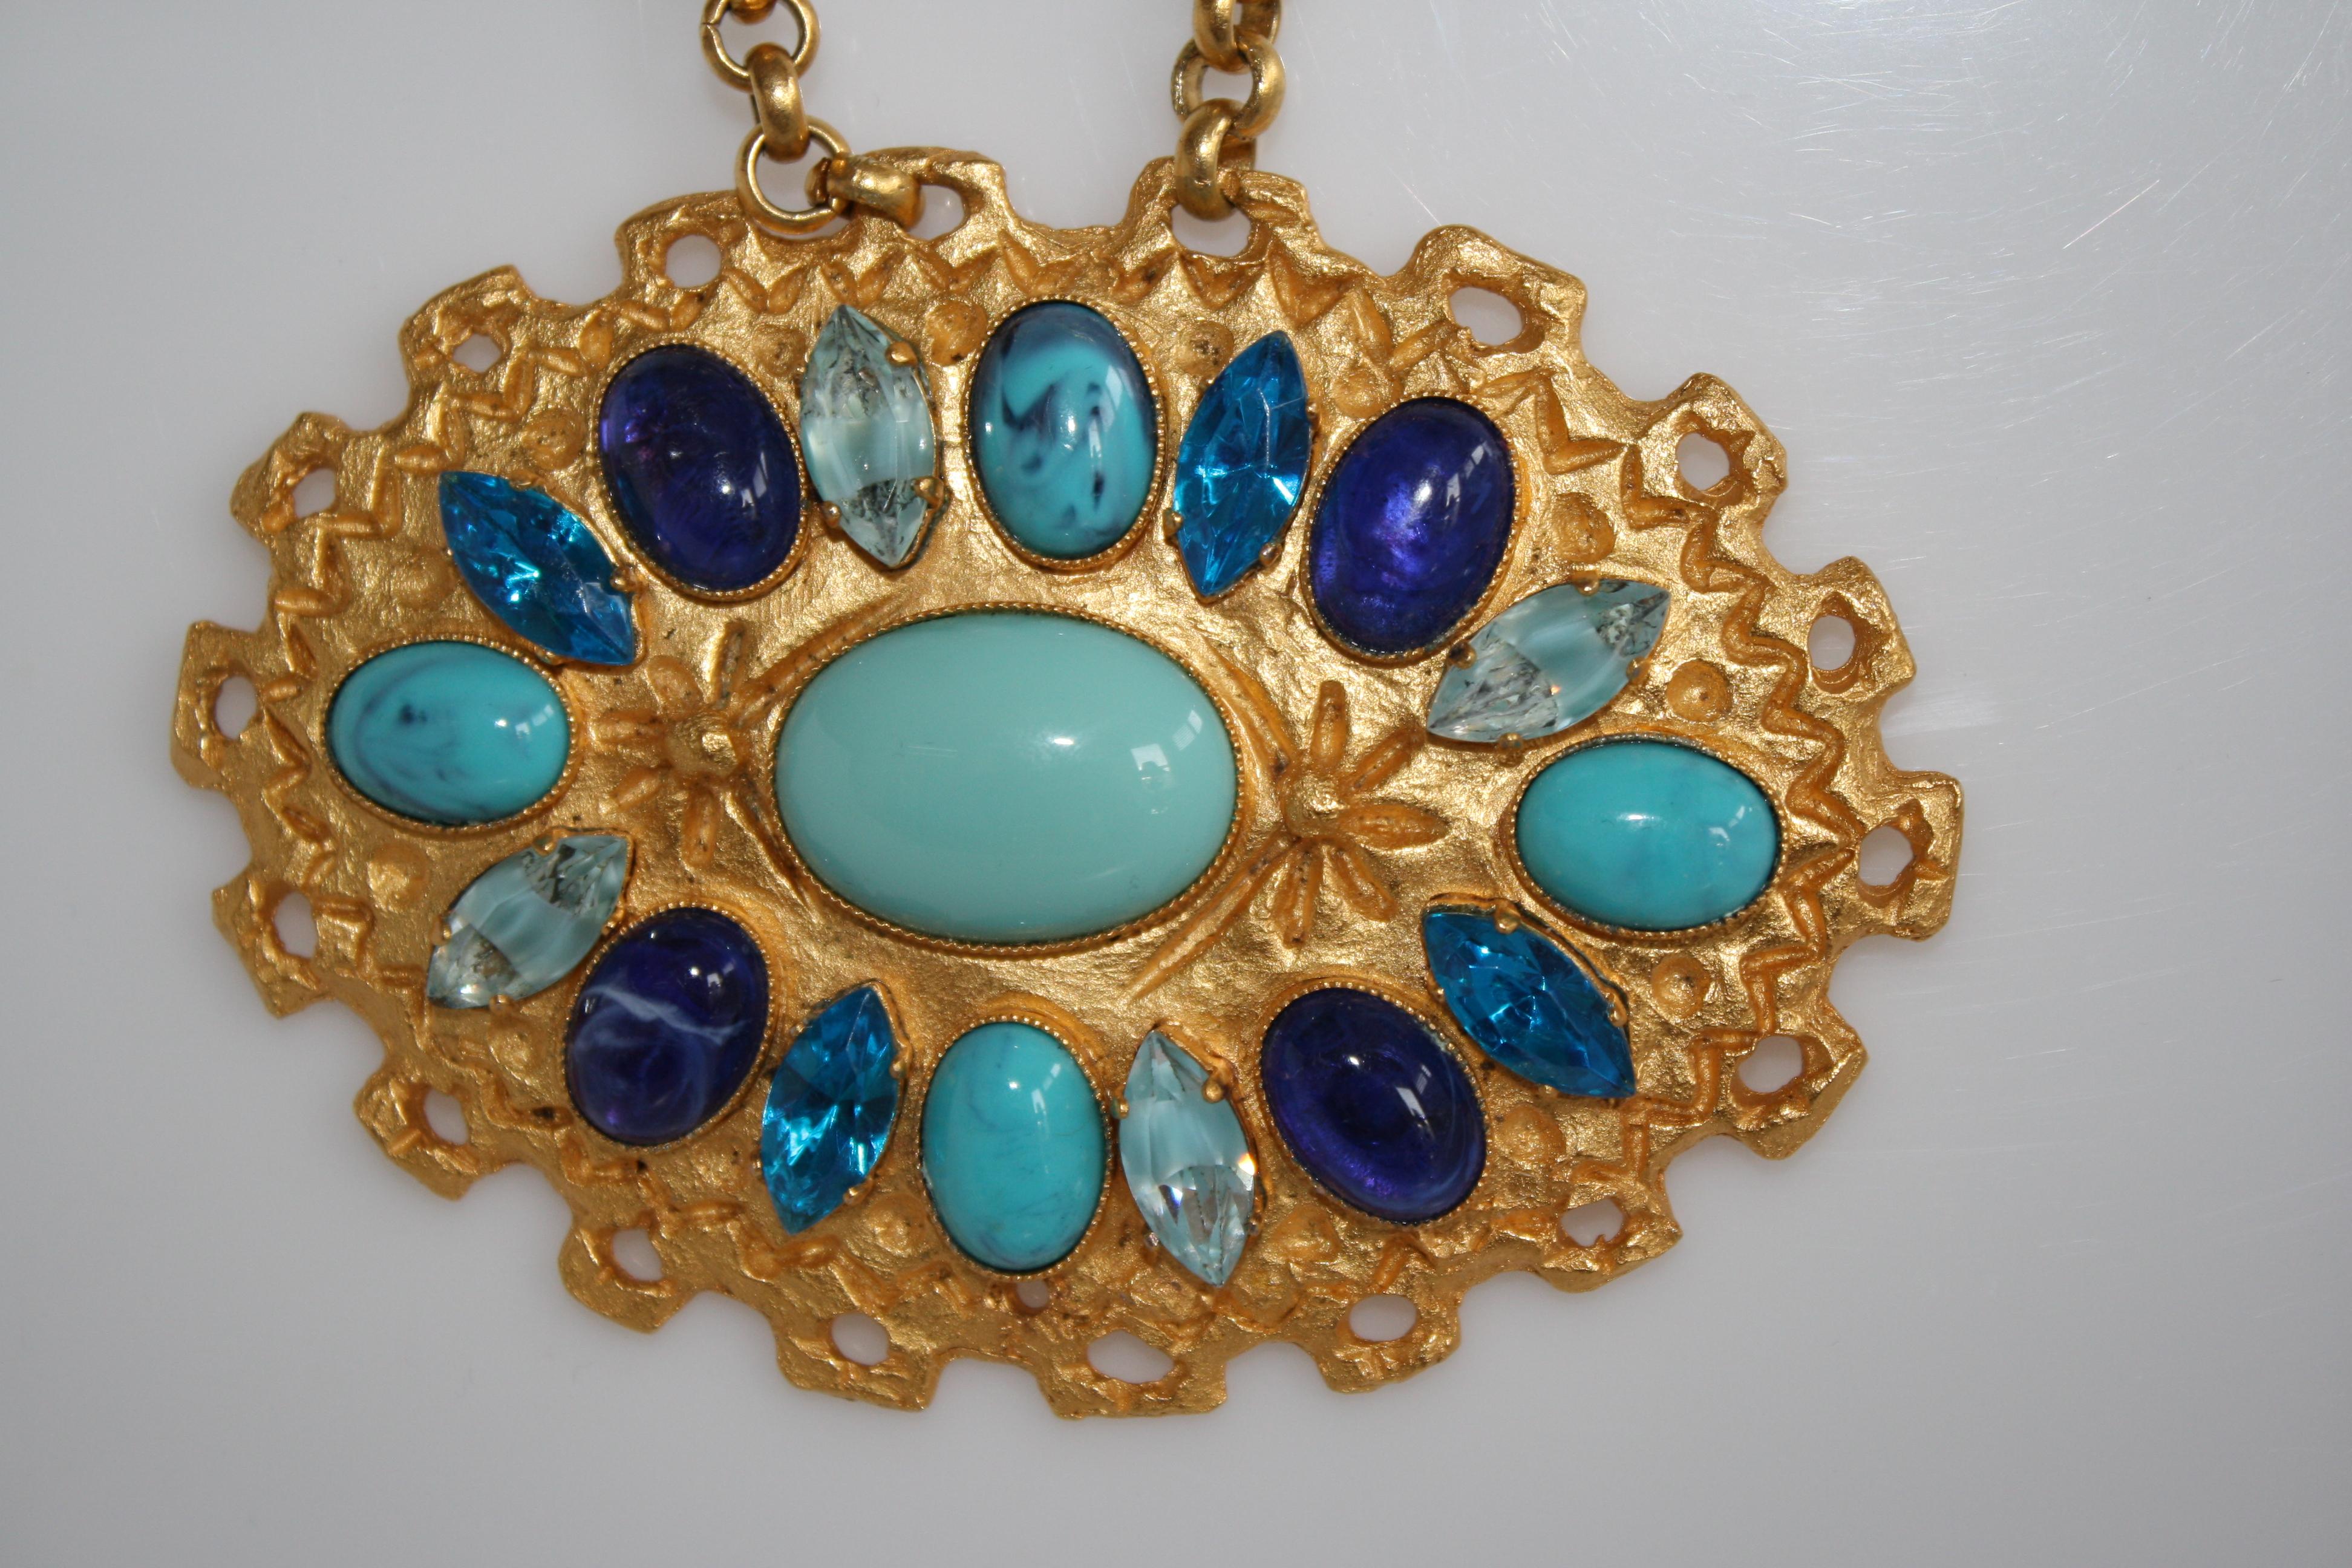 A gorgeous medallion of hammered gold with glass and crystal strung on handmade glass beads from French designer Carole St. Germes. 

Pendant is 4